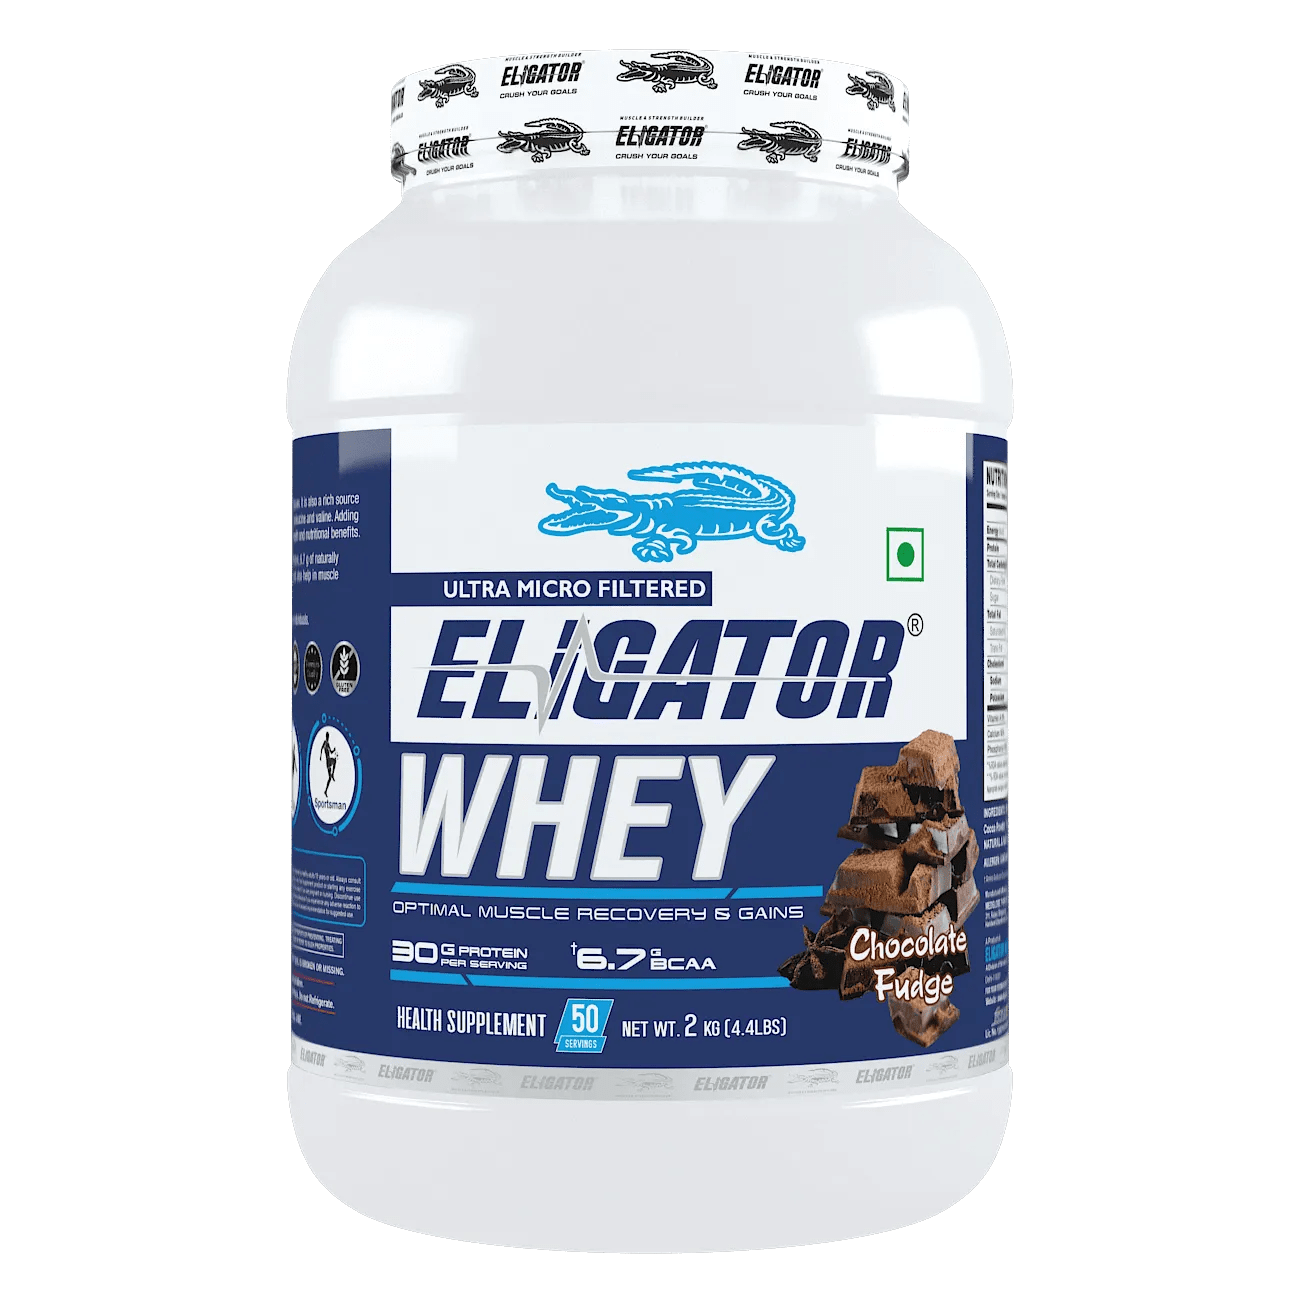 Eligator Whey Protein (Ultra Micro Filtered)